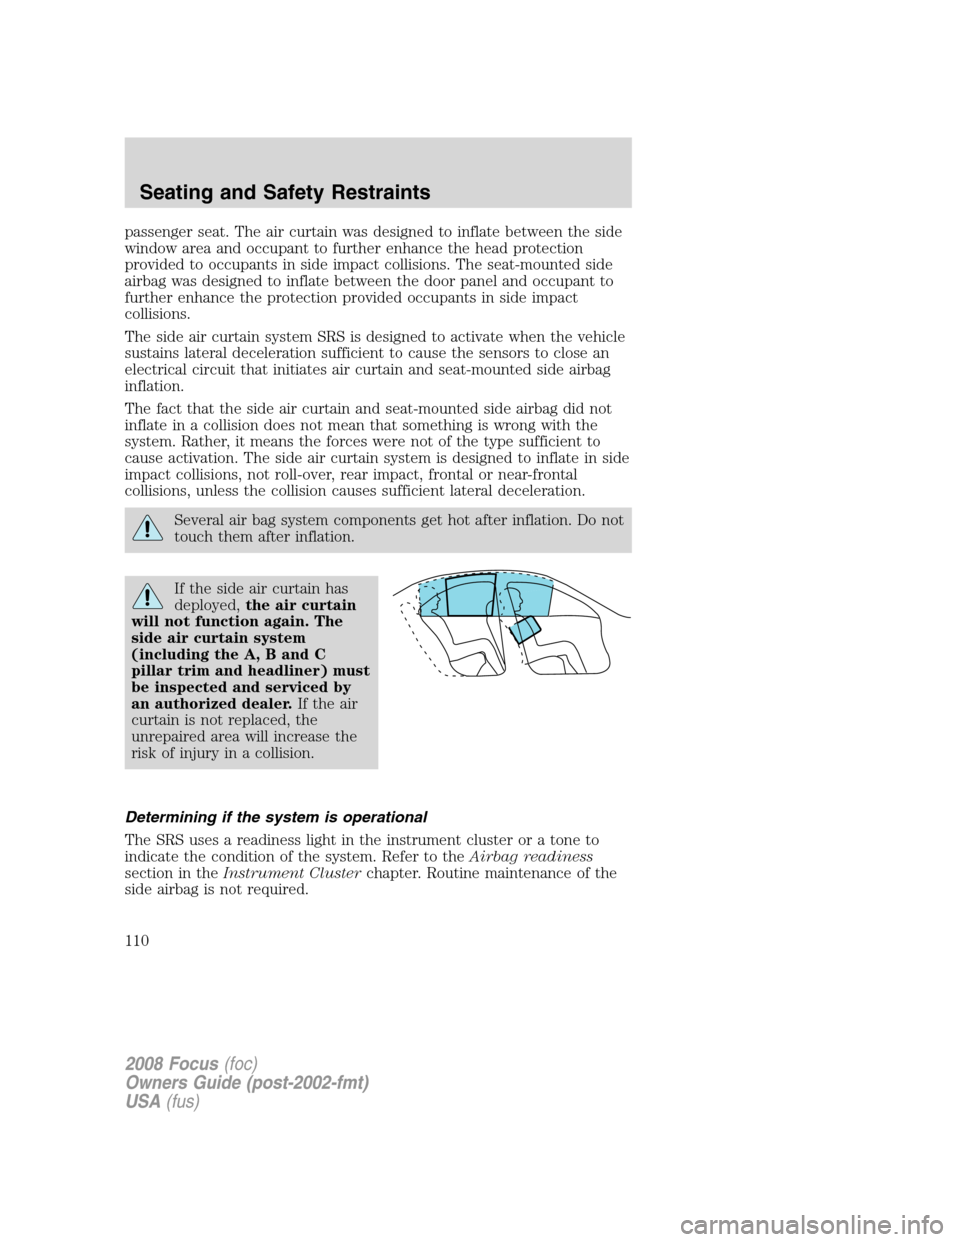 FORD FOCUS 2008 2.G User Guide passenger seat. The air curtain was designed to inflate between the side
window area and occupant to further enhance the head protection
provided to occupants in side impact collisions. The seat-mount